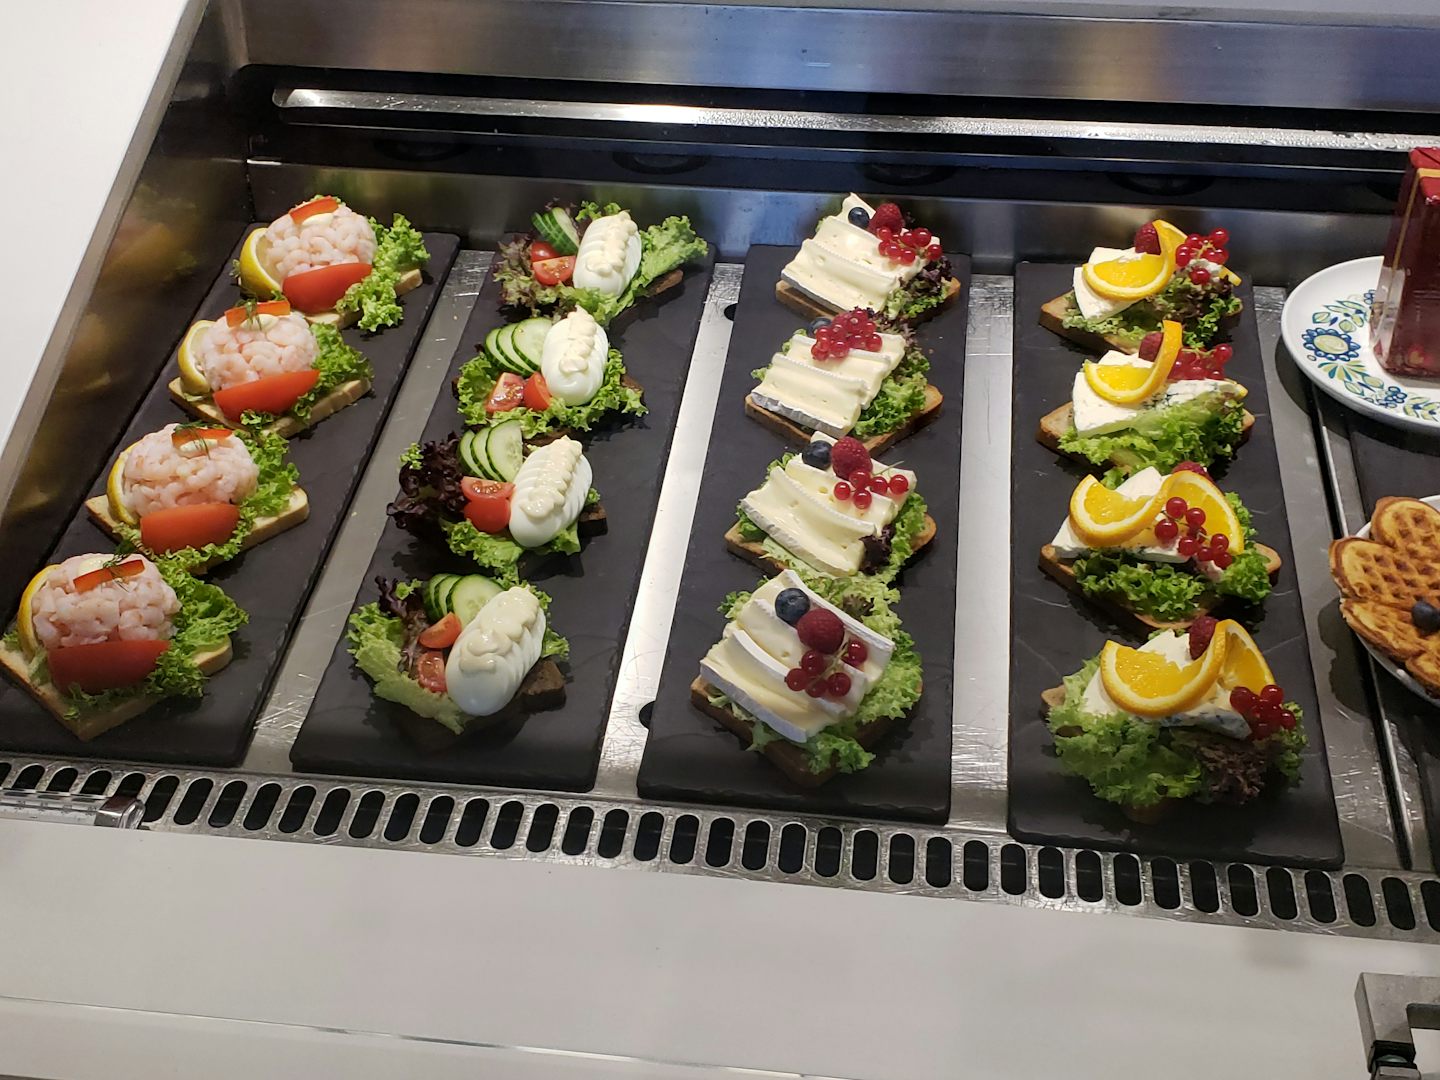 Afternoon/Evening open face sandwiches selections at Mamsen's